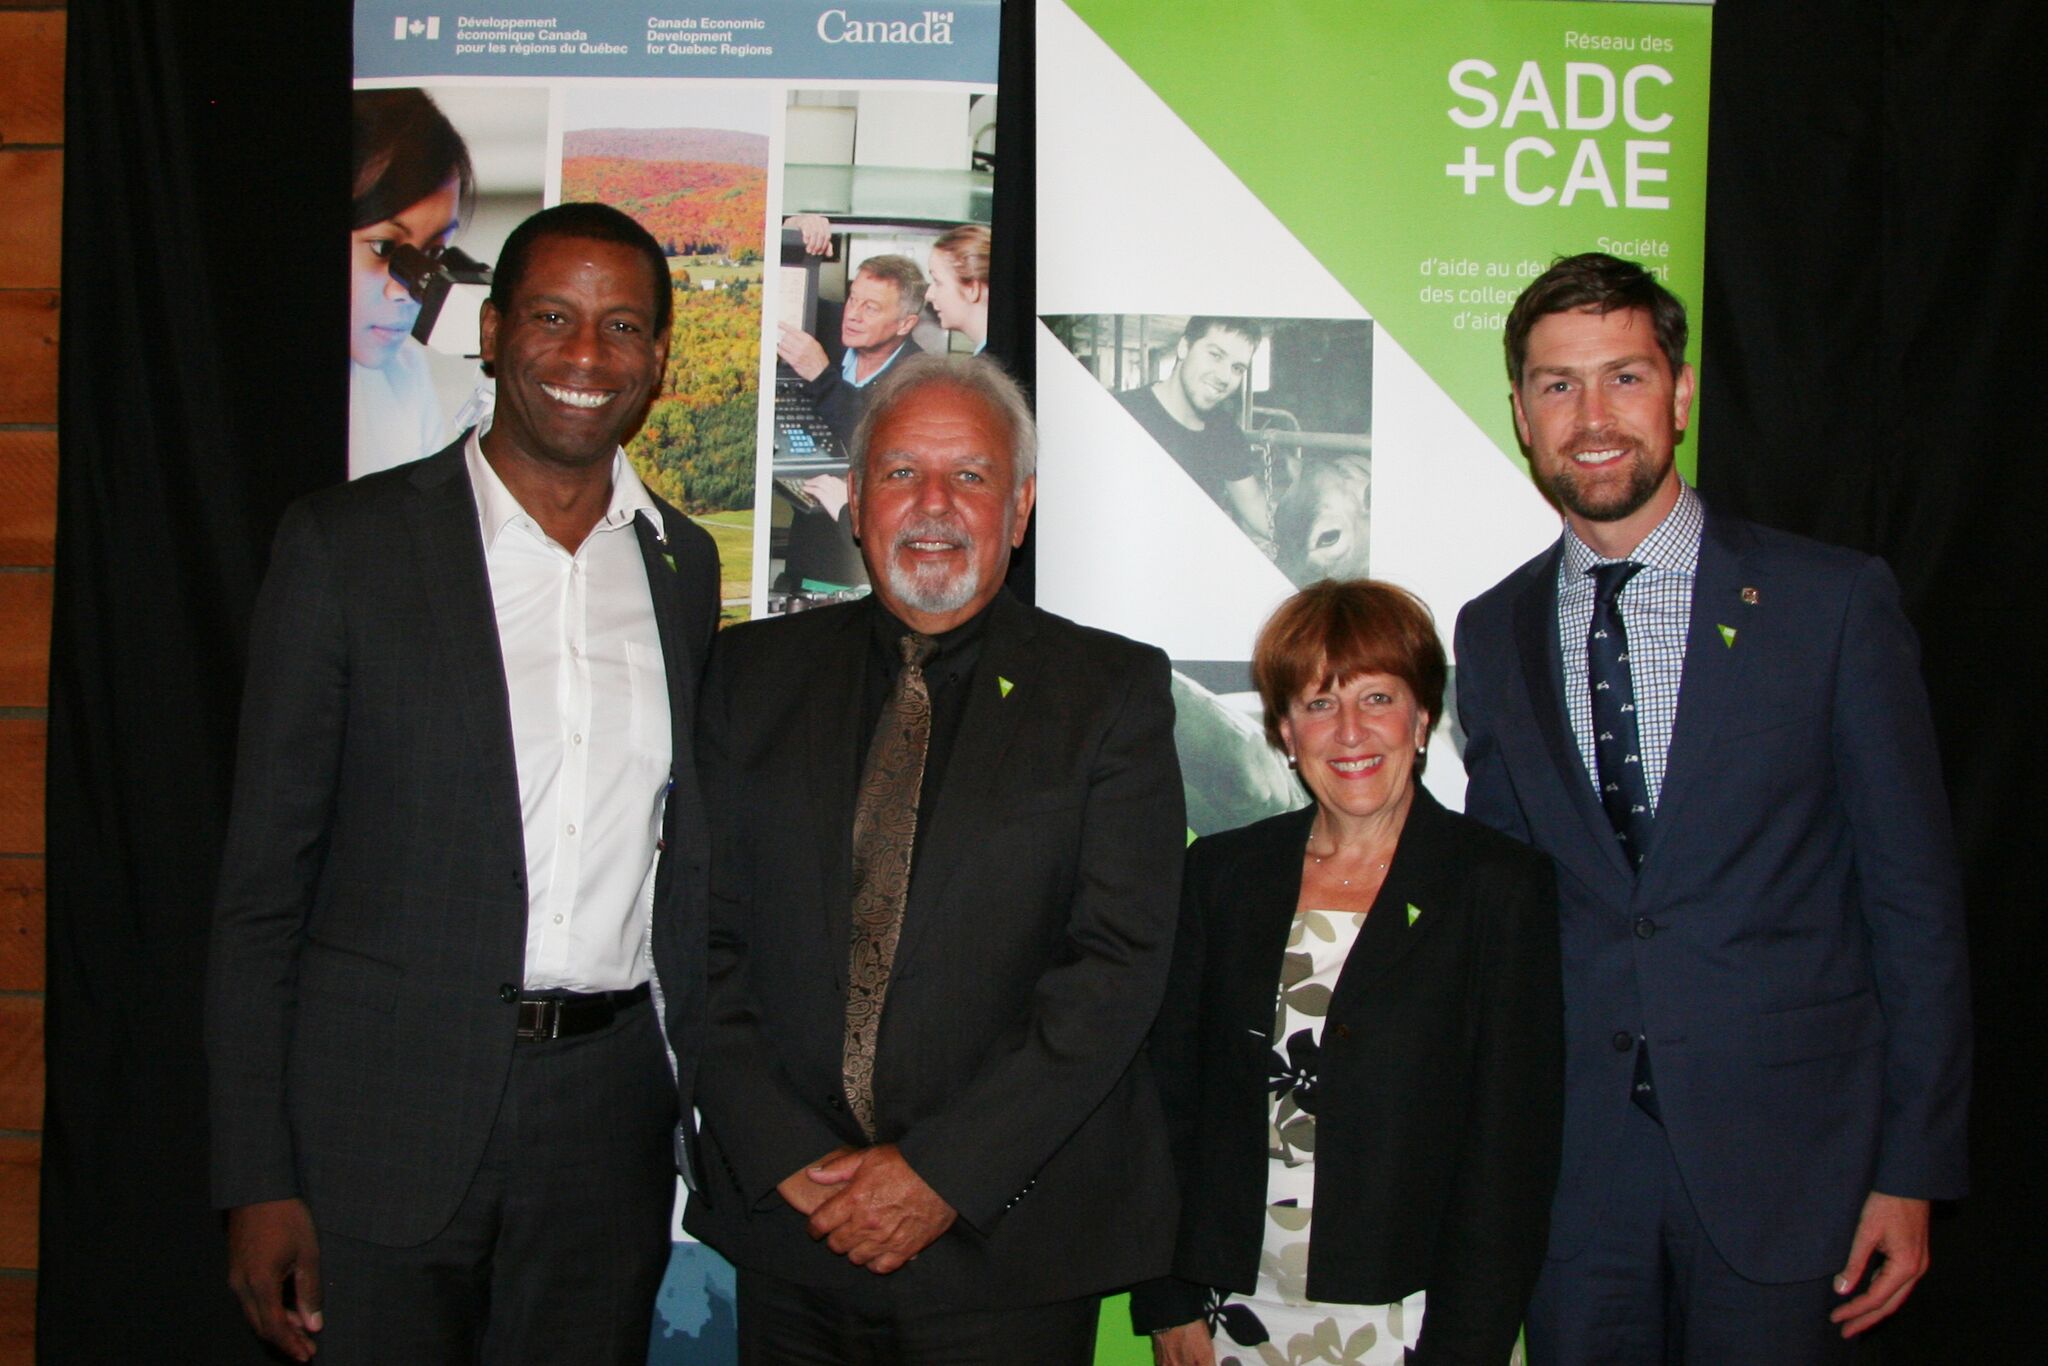 SADC and CAE receive $86M  for the regions of Quebec